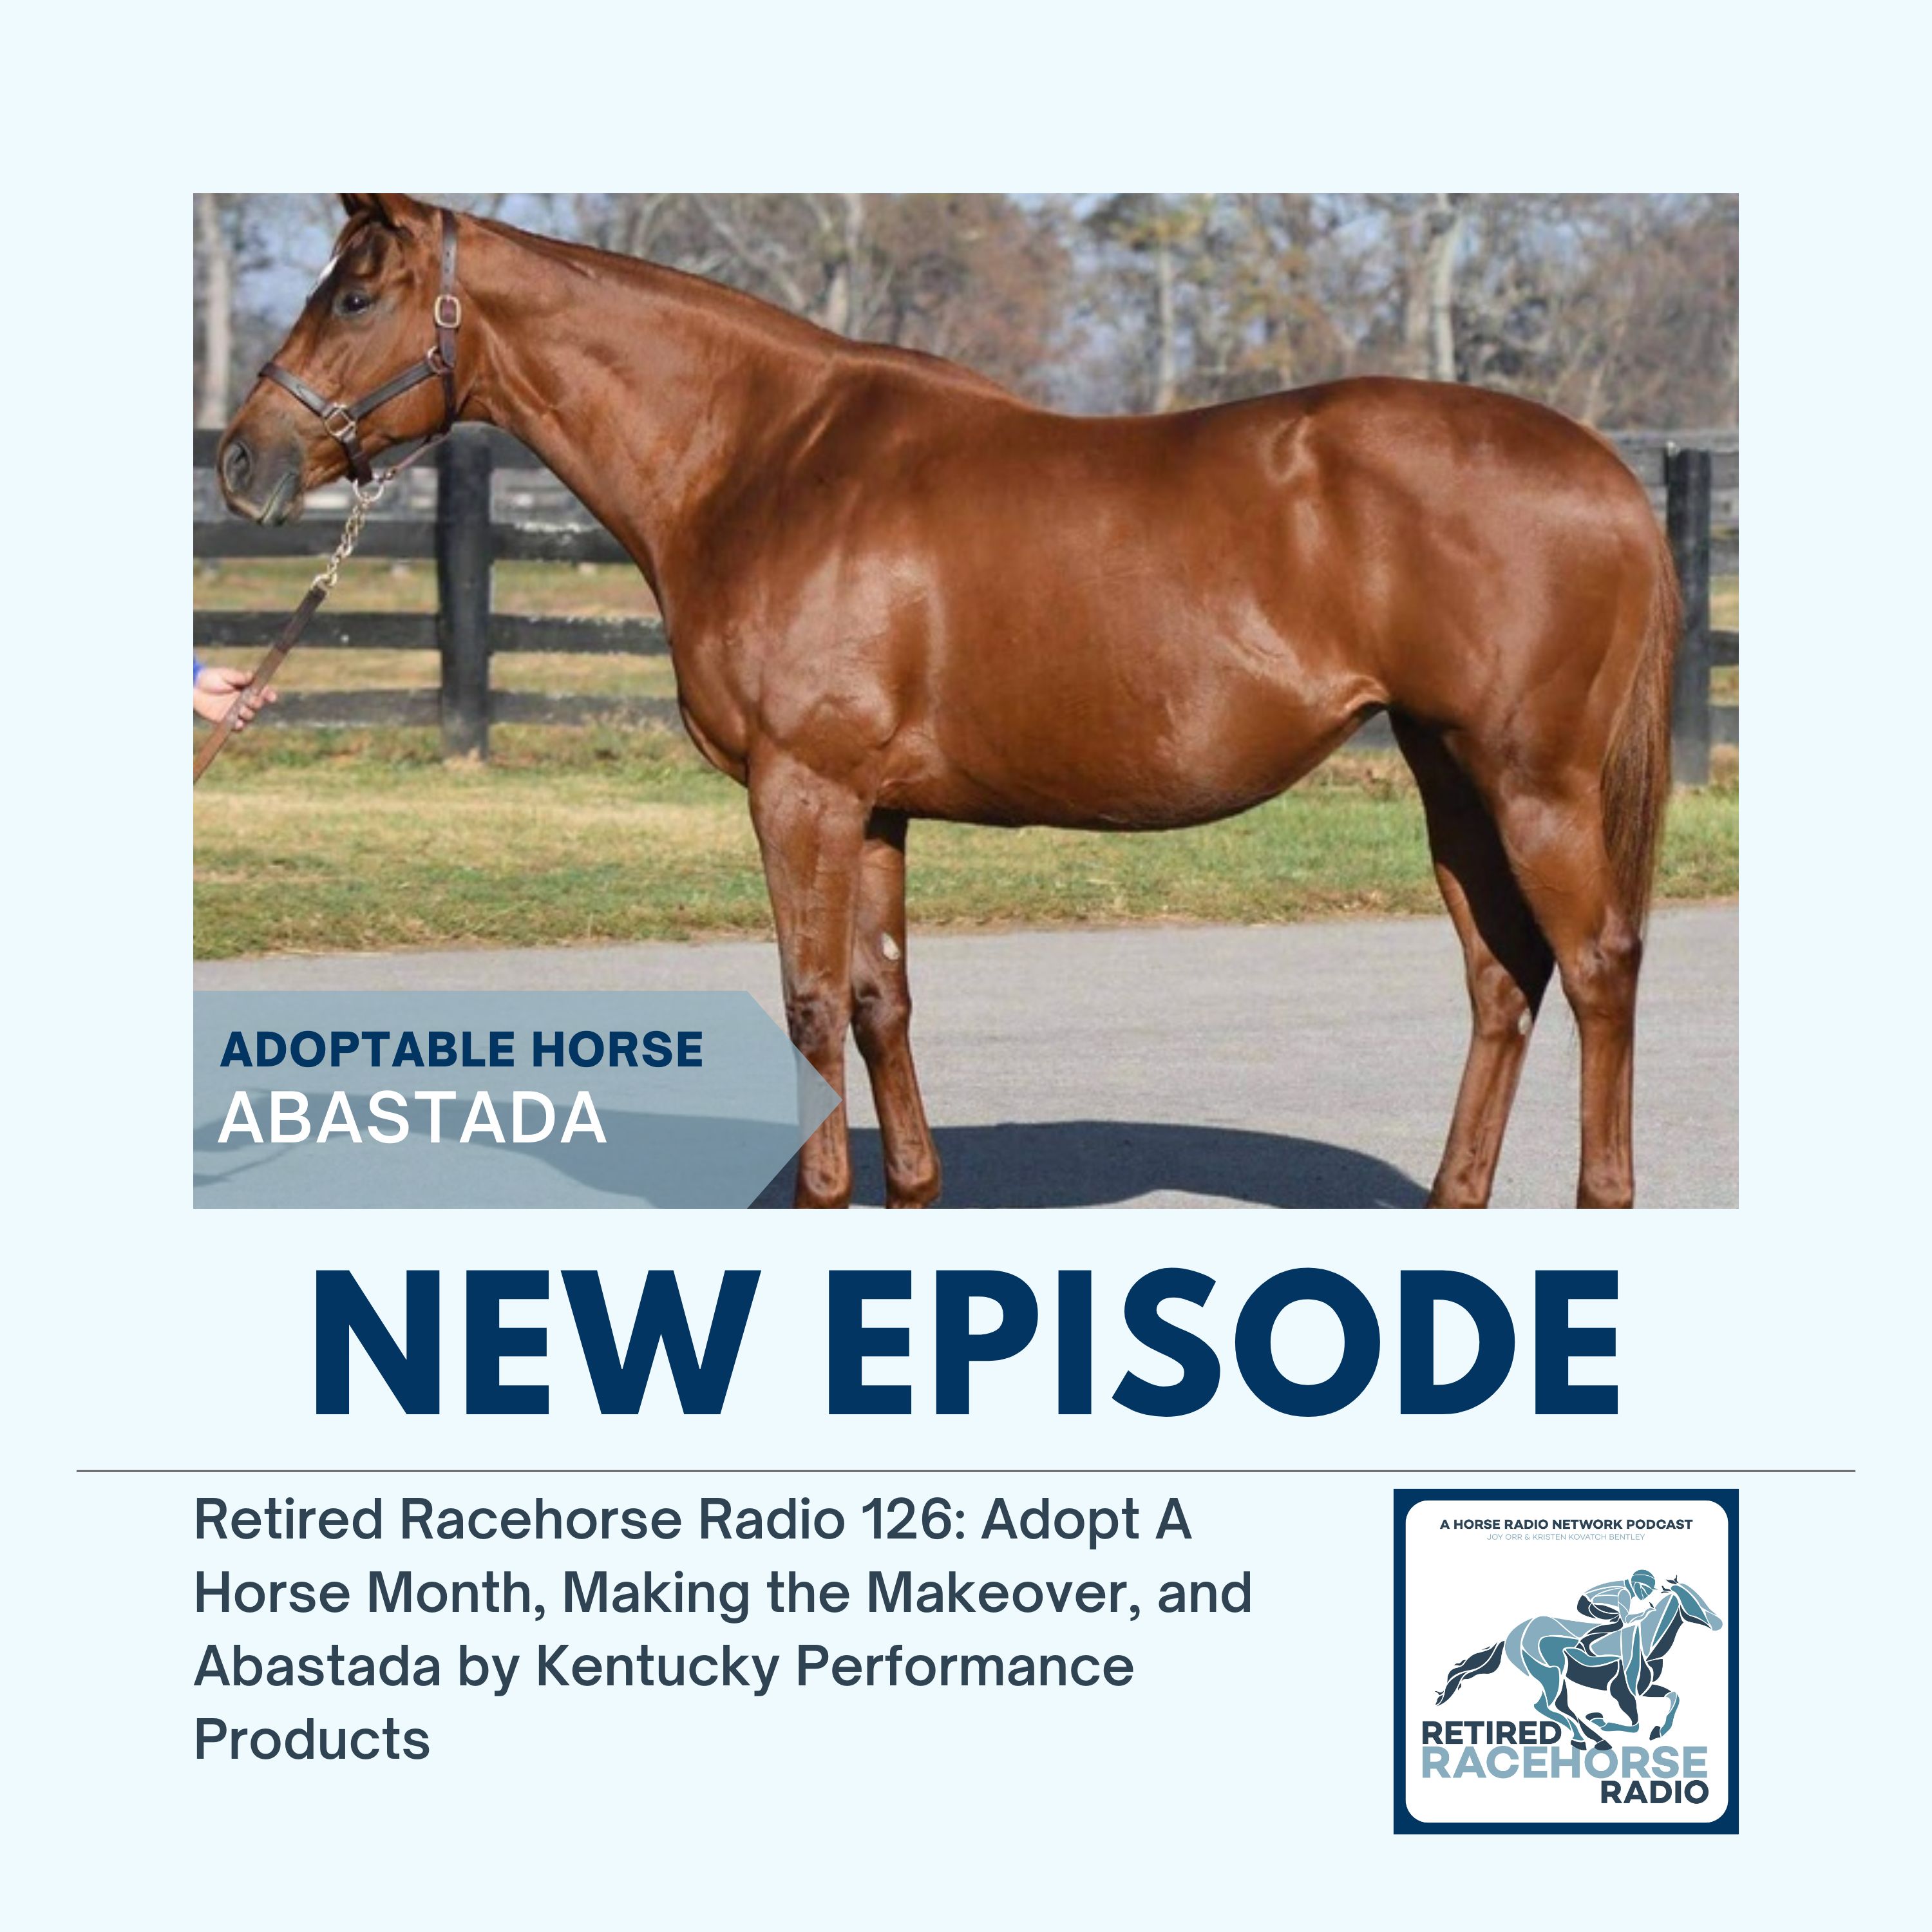 ASPCA Adopt a Horse Month, Making the Makeover, and Abastada by Kentucky Performance Products